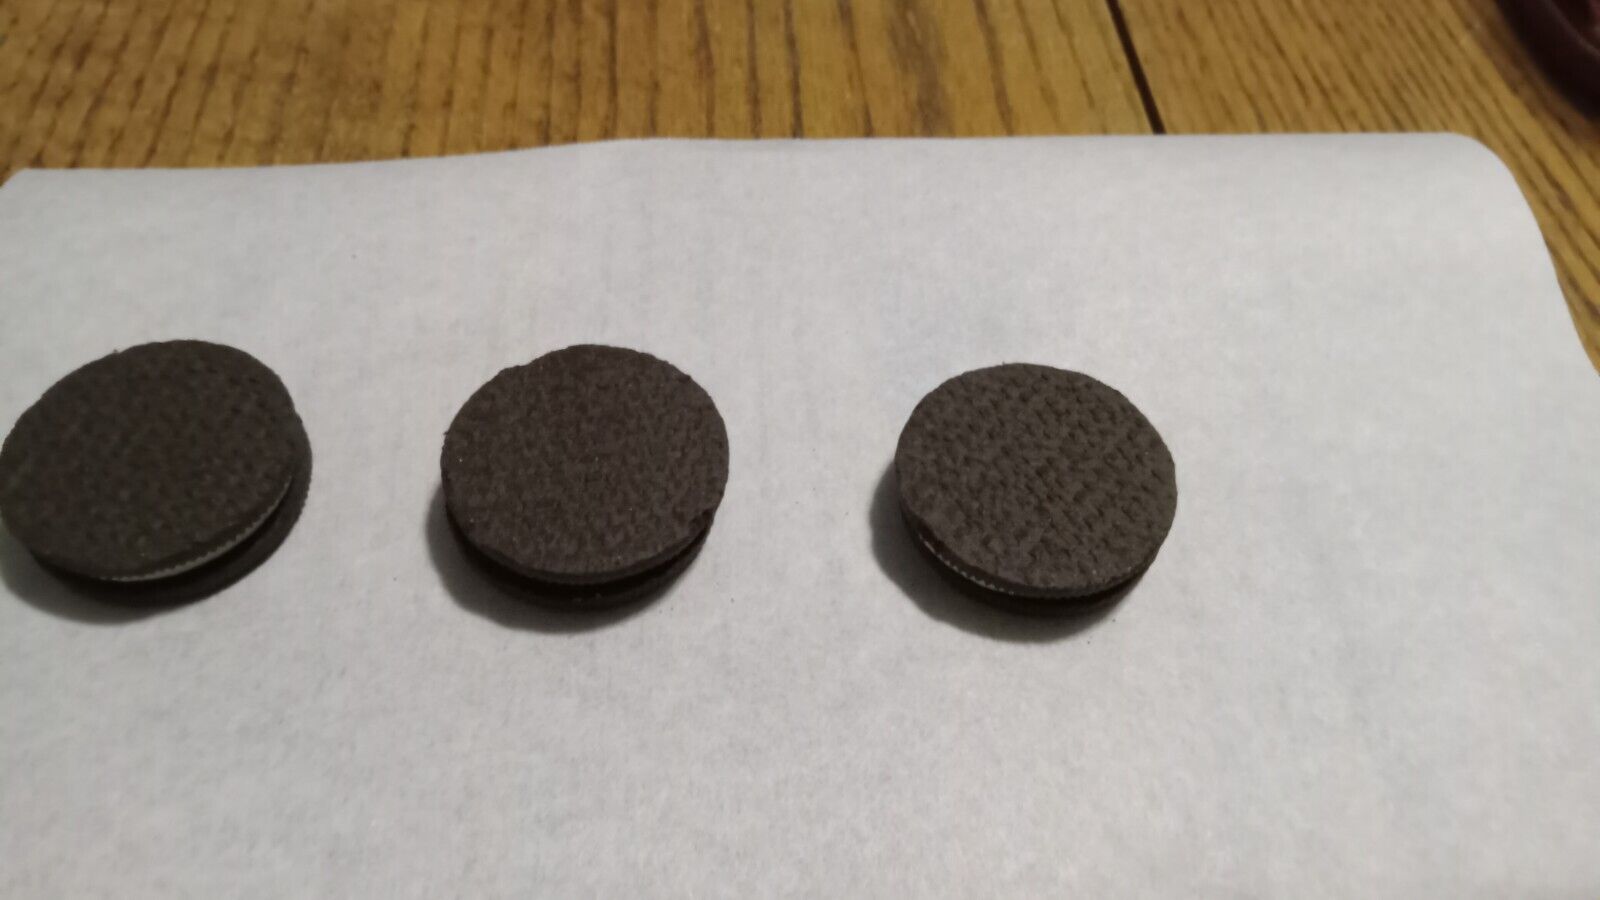 3 One-Side Flipped Oreo. Double Stuffed. RARE DEFECT HARD TO FIND